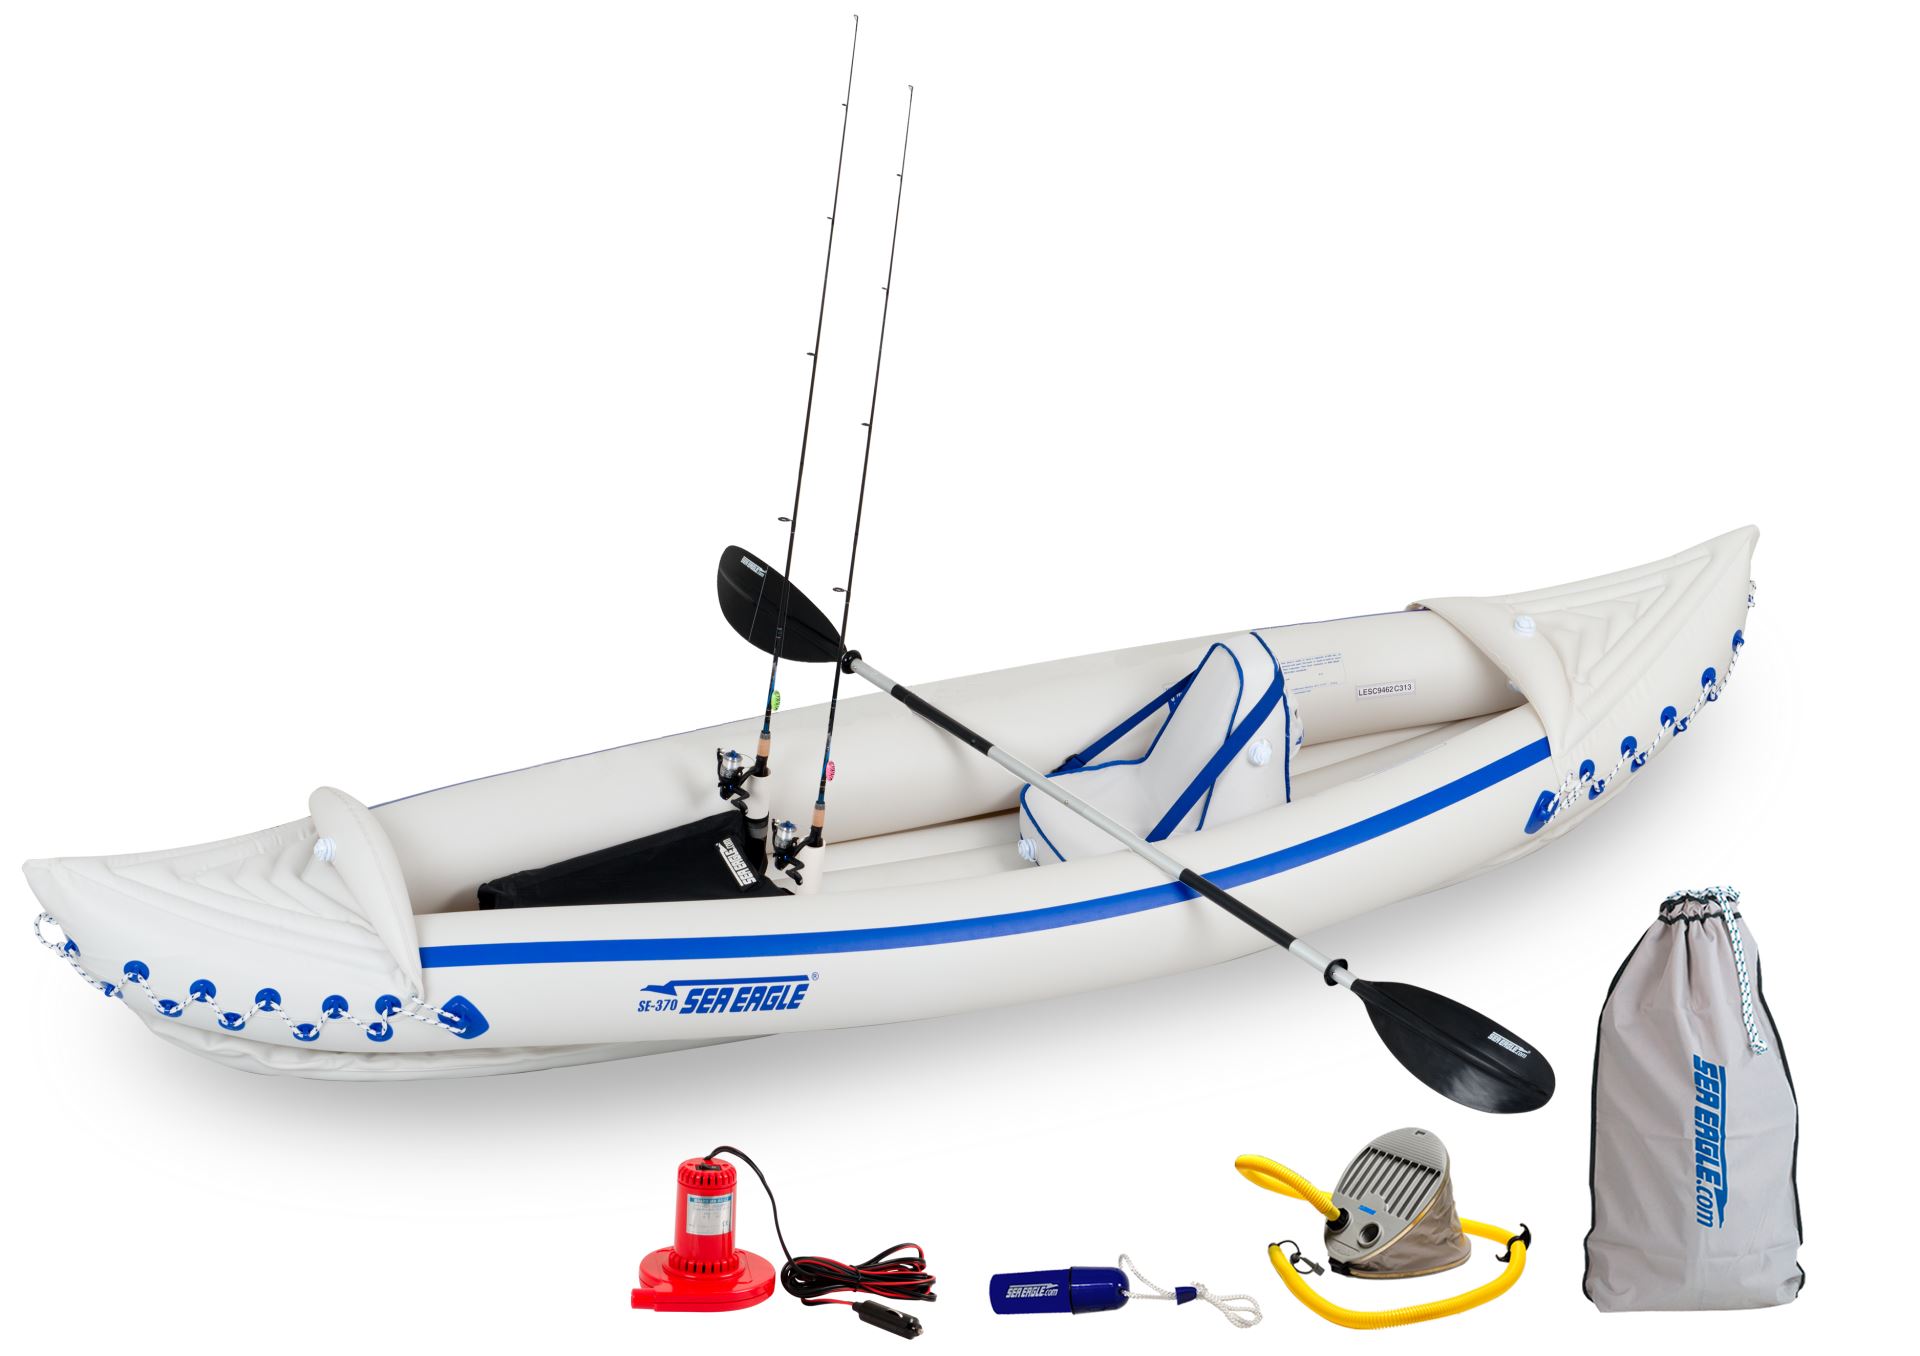 Ambassadør Spanien erosion Sea Eagle SE 370 3 person Inflatable Kayak. Package Prices starting at $249  plus FREE Shipping